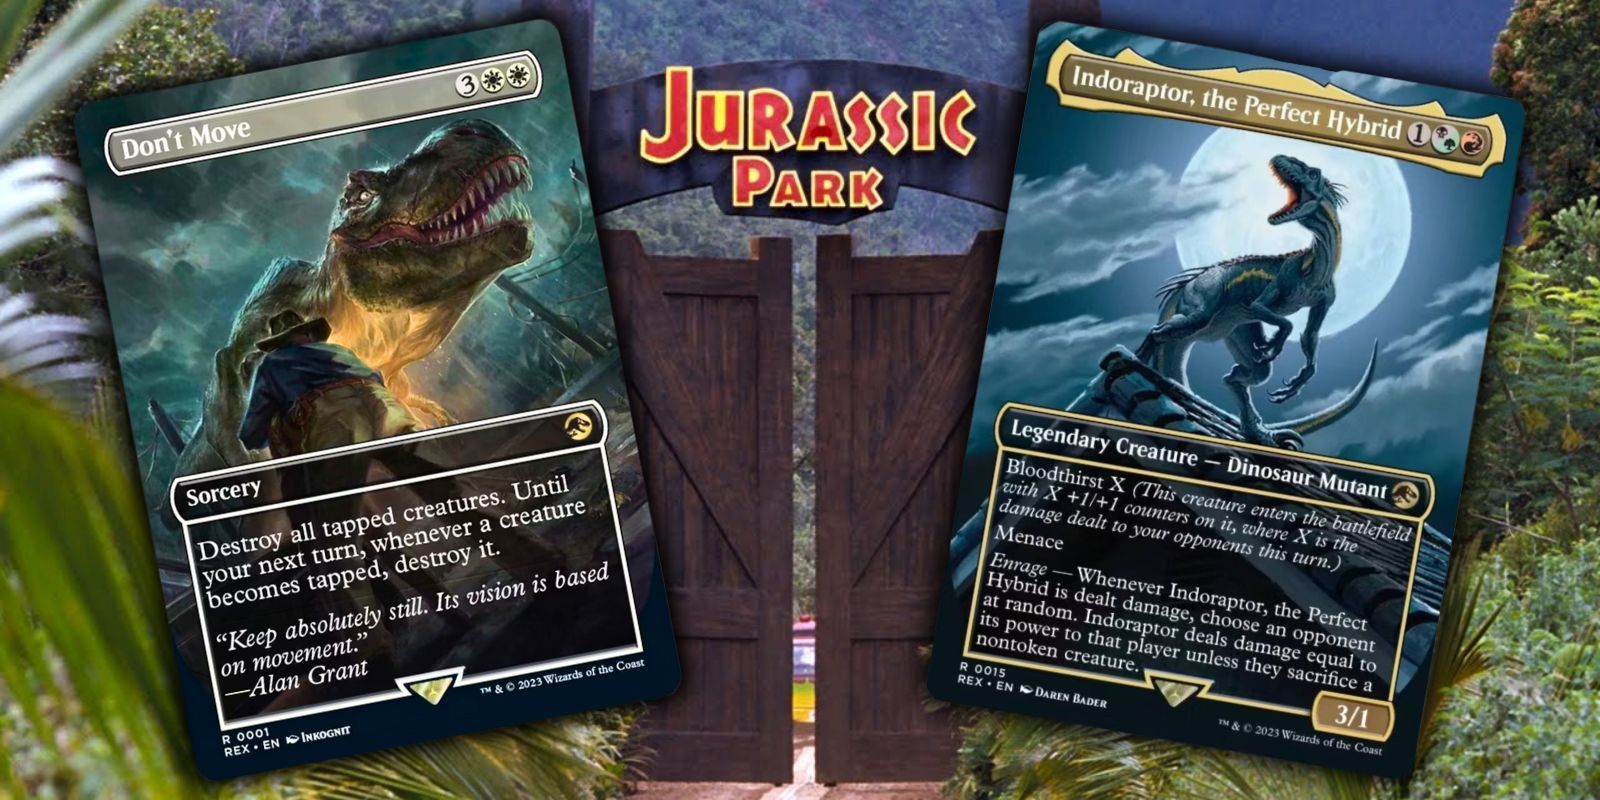 Jurassic Park MTG Cards With The Jurassic Park Gate Behind Them